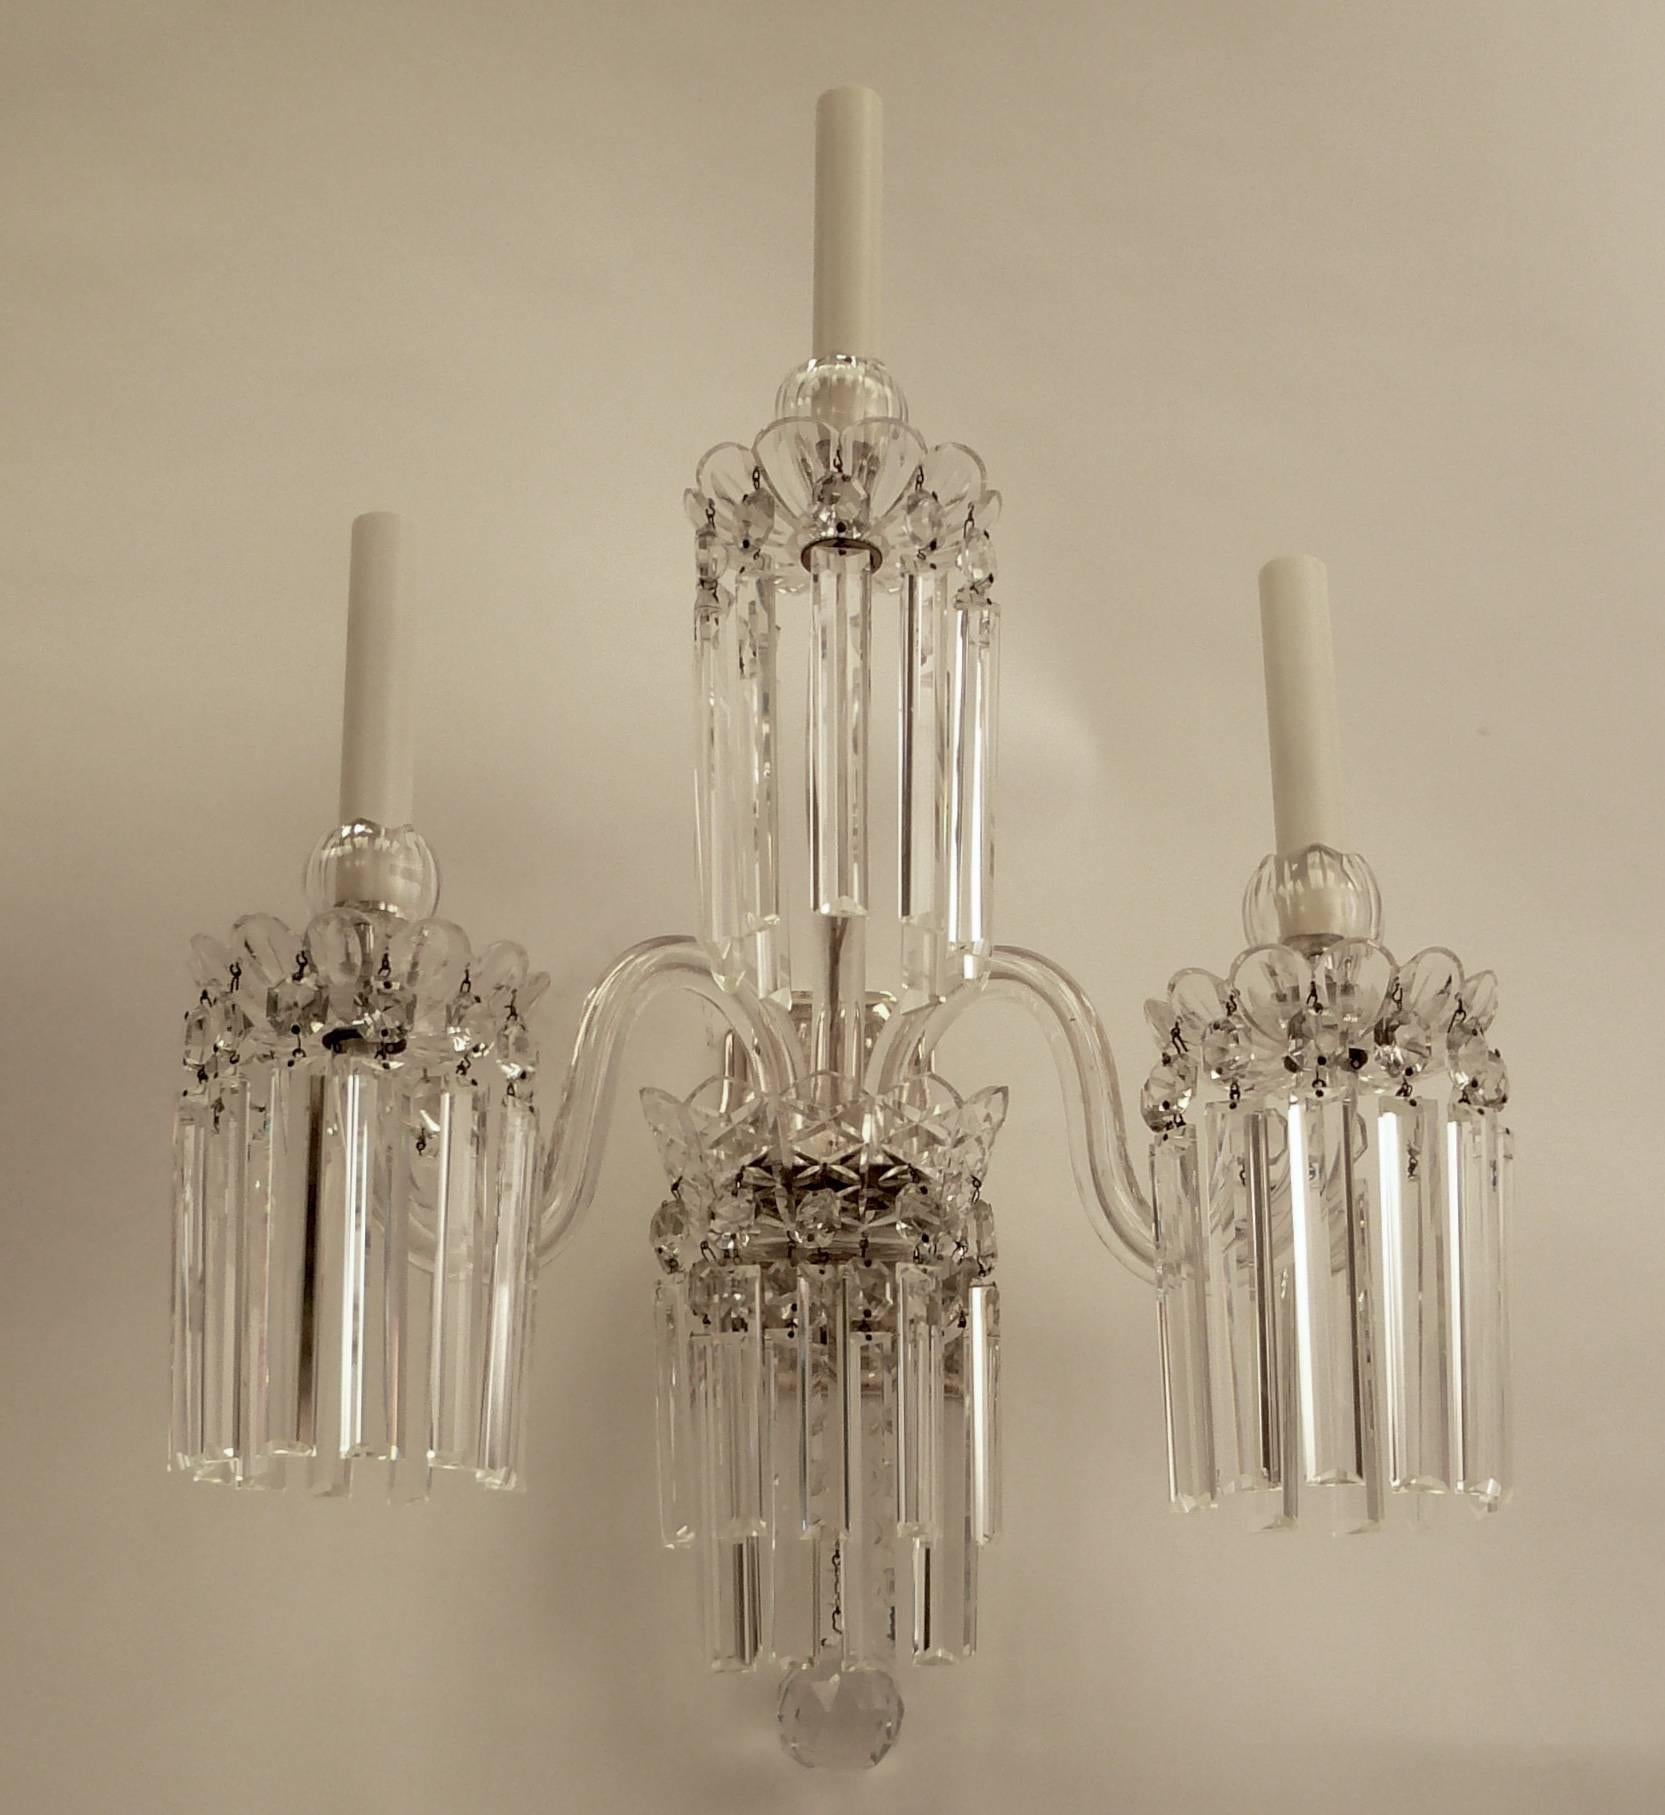 Four Very Fine Mid-19th Century English Cut Crystal Sconces, Attributed to Osler 3